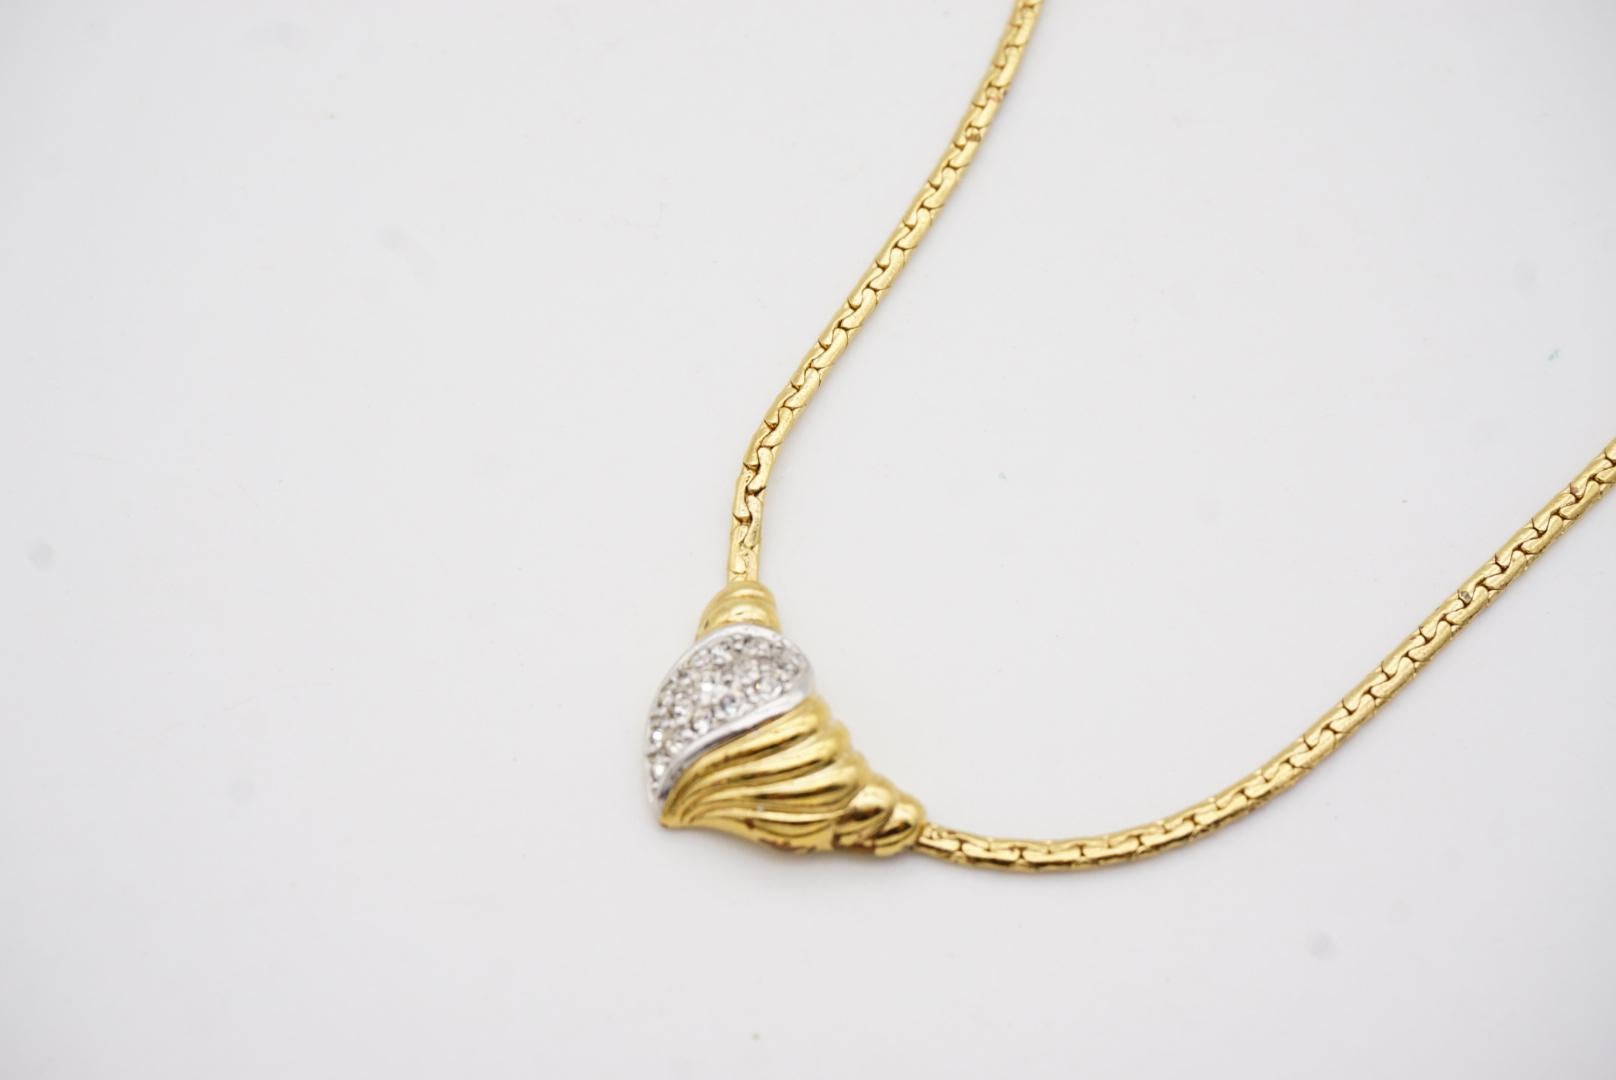 Christian Dior GROSSE 1970s Vintage Crystals Silver Gold Heart Pendant Necklace For Sale 2